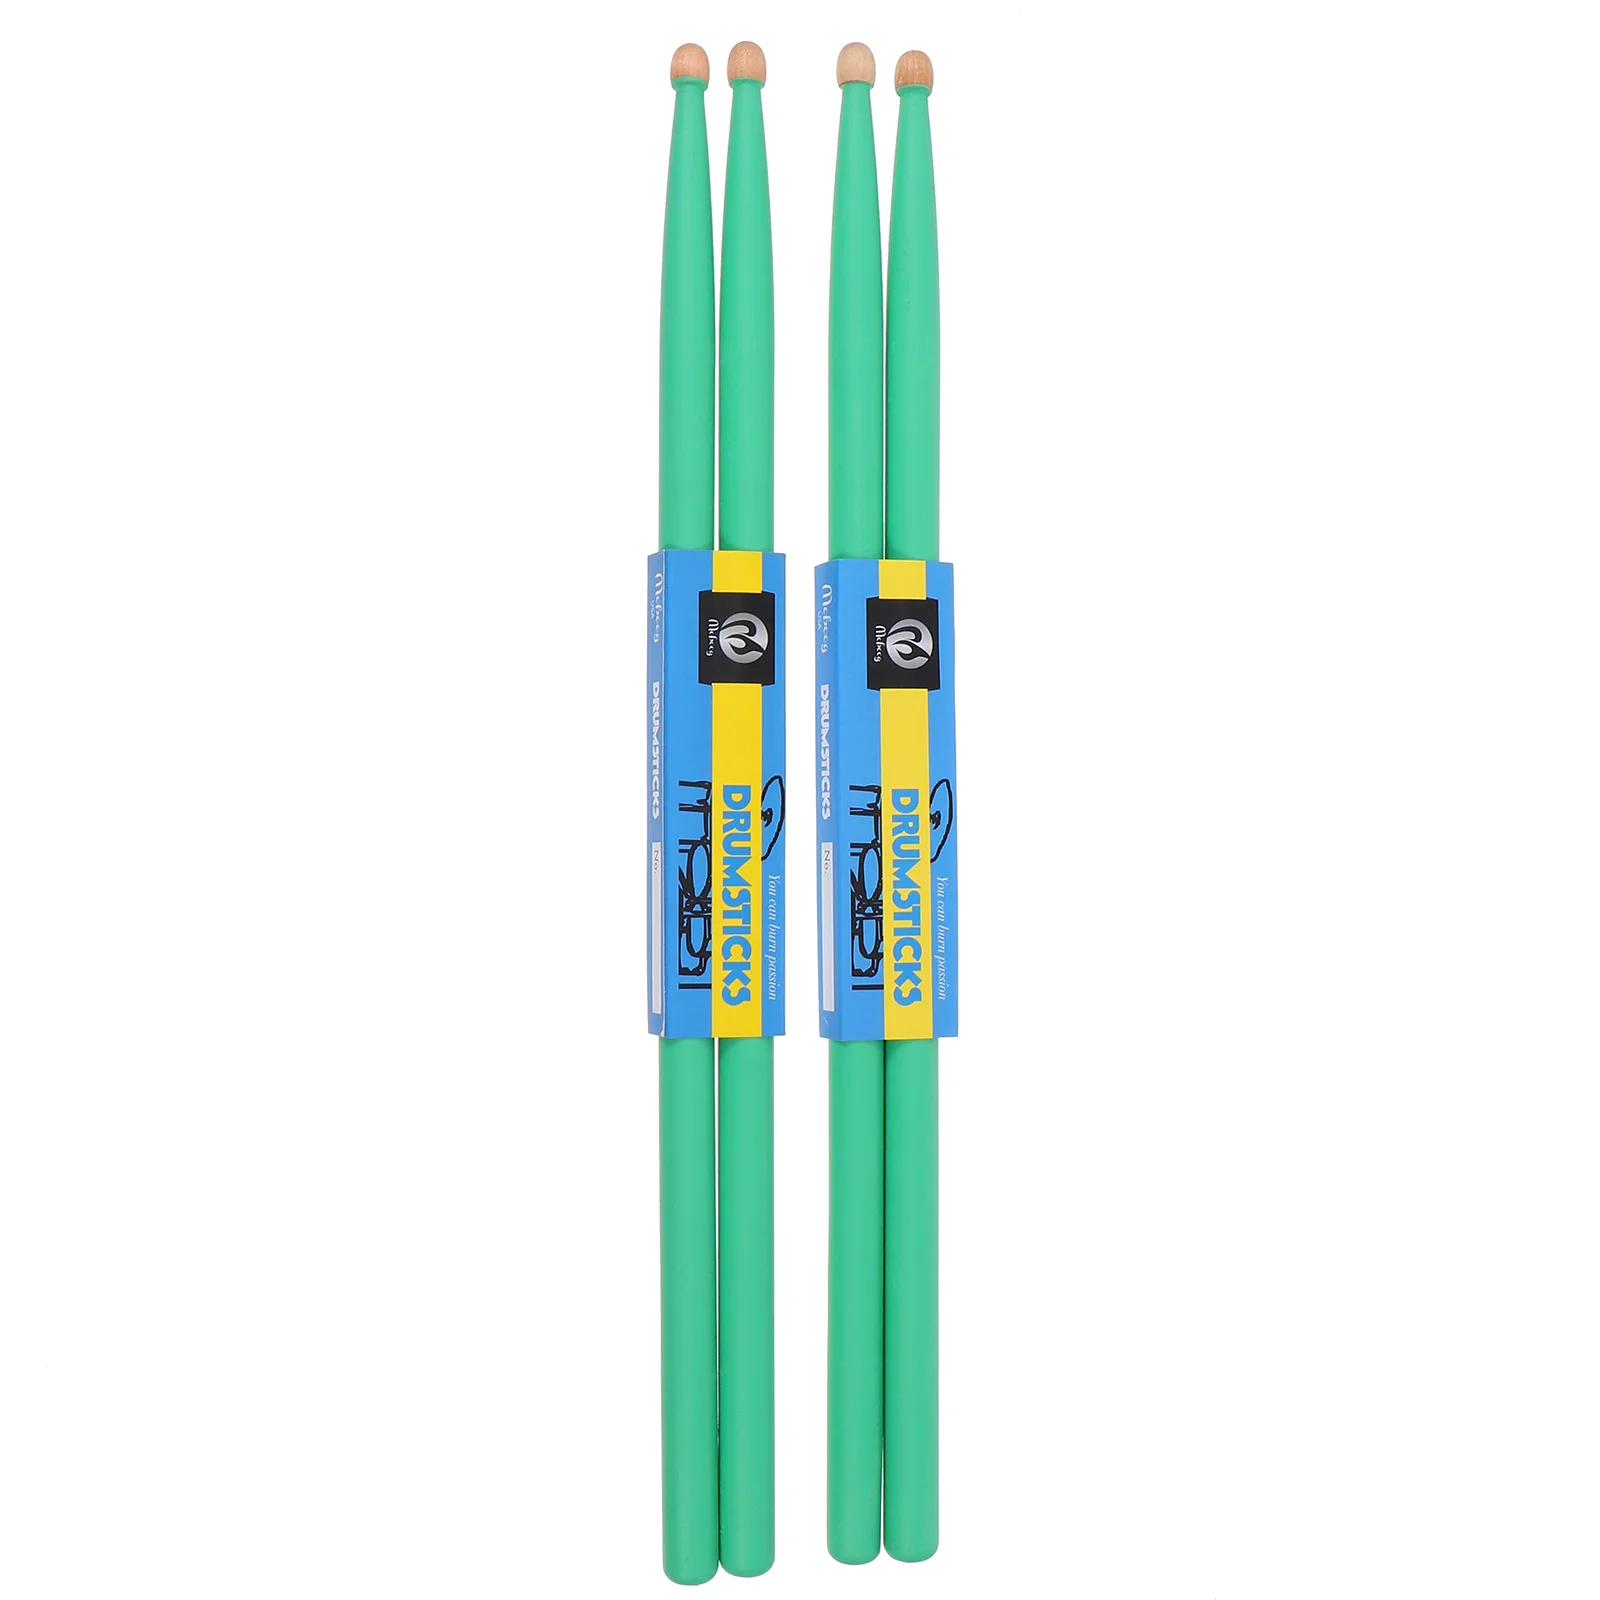 2 Pairs Percussion Instruments Adults Tip Drum Sticks Wood Drumsticks Wood Tip Drumstick Professional Drum Sticks enlarge